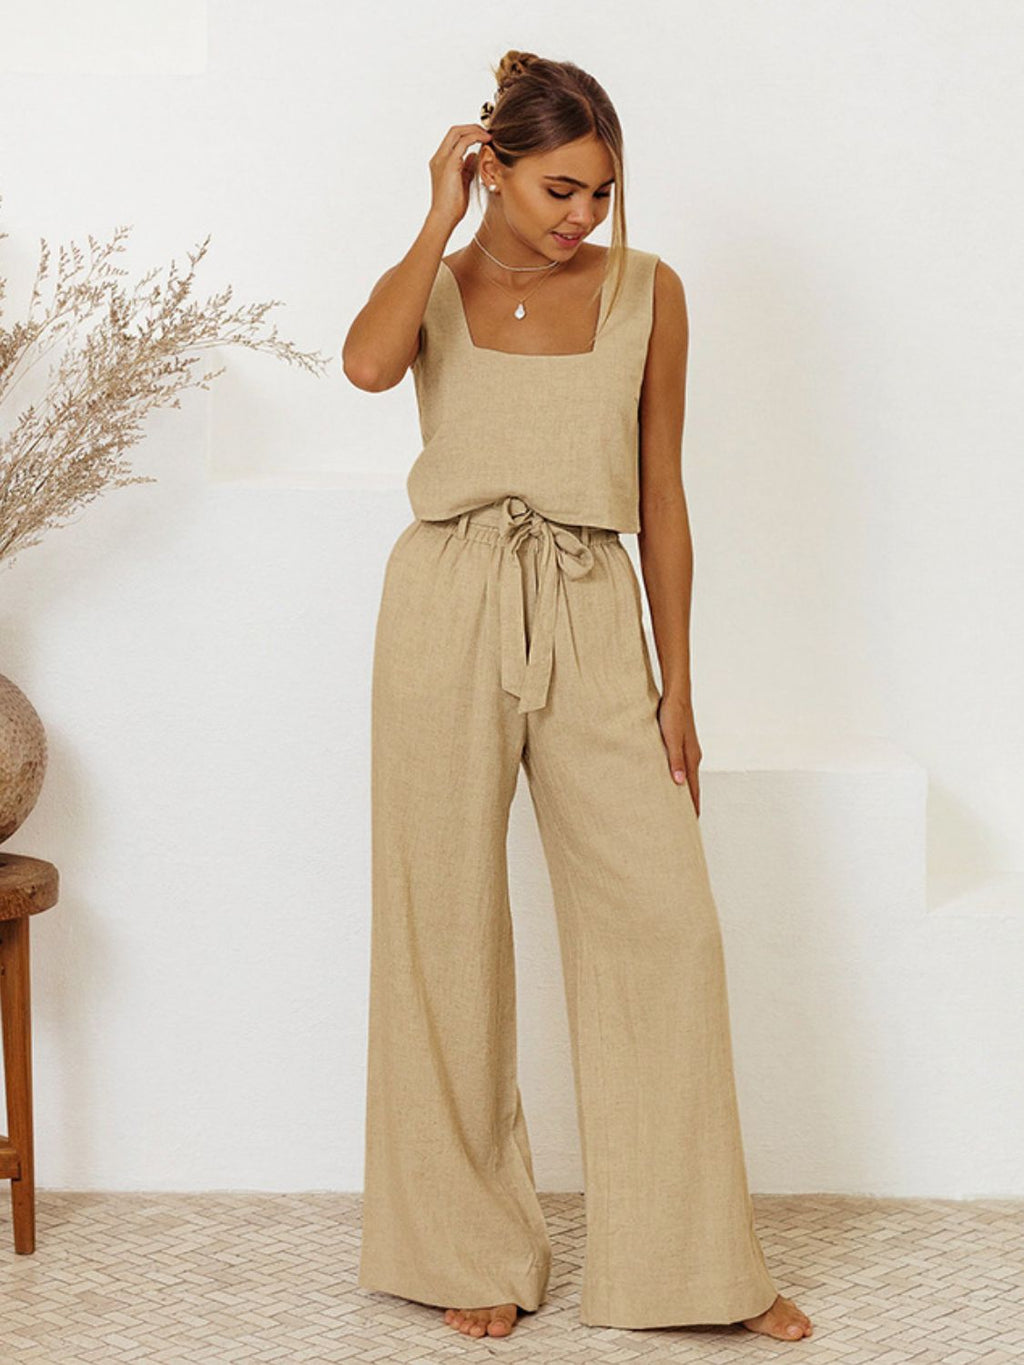 Square Neck Sleeveless Top and Pants Set